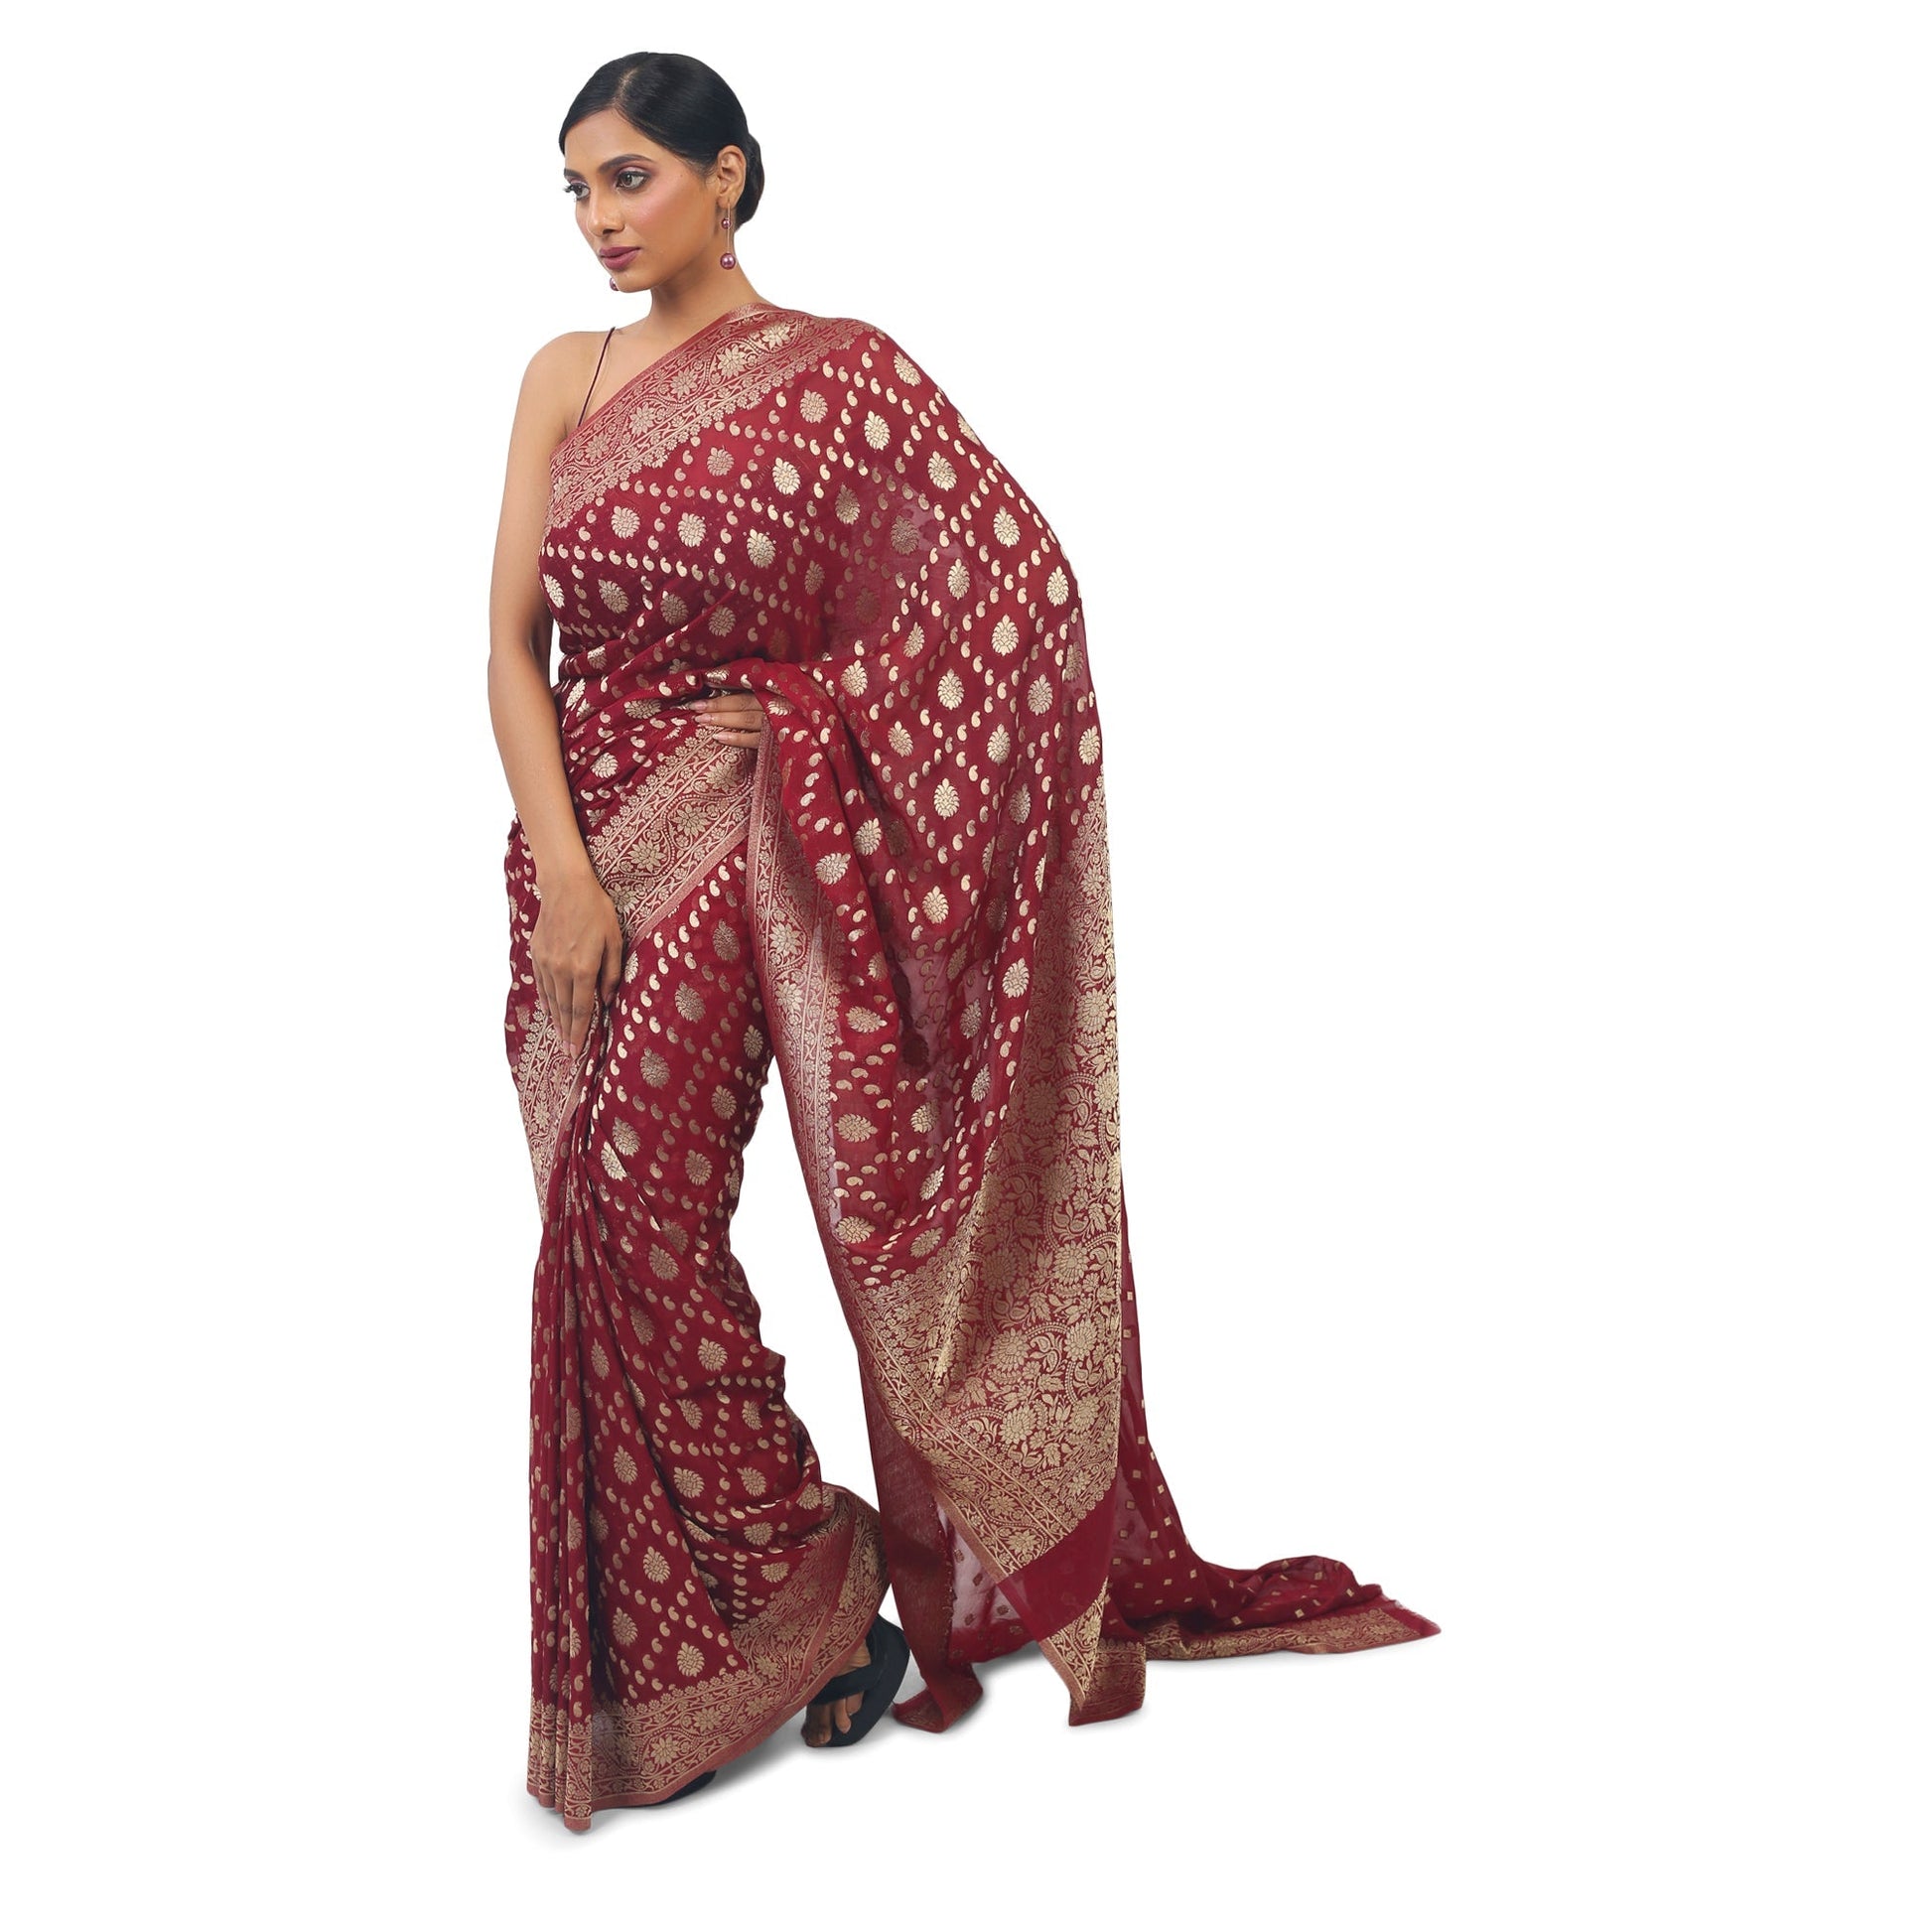 Maroon soft Georgette Banarsi Saree With golden work boarder Apparel & Accessories 50%off Cocktail Festive maroon Saree Soft Georgette wine thehangrmaroon-soft-georgette-banarsi-saree-with-golden-work-boarderthehangr-767733